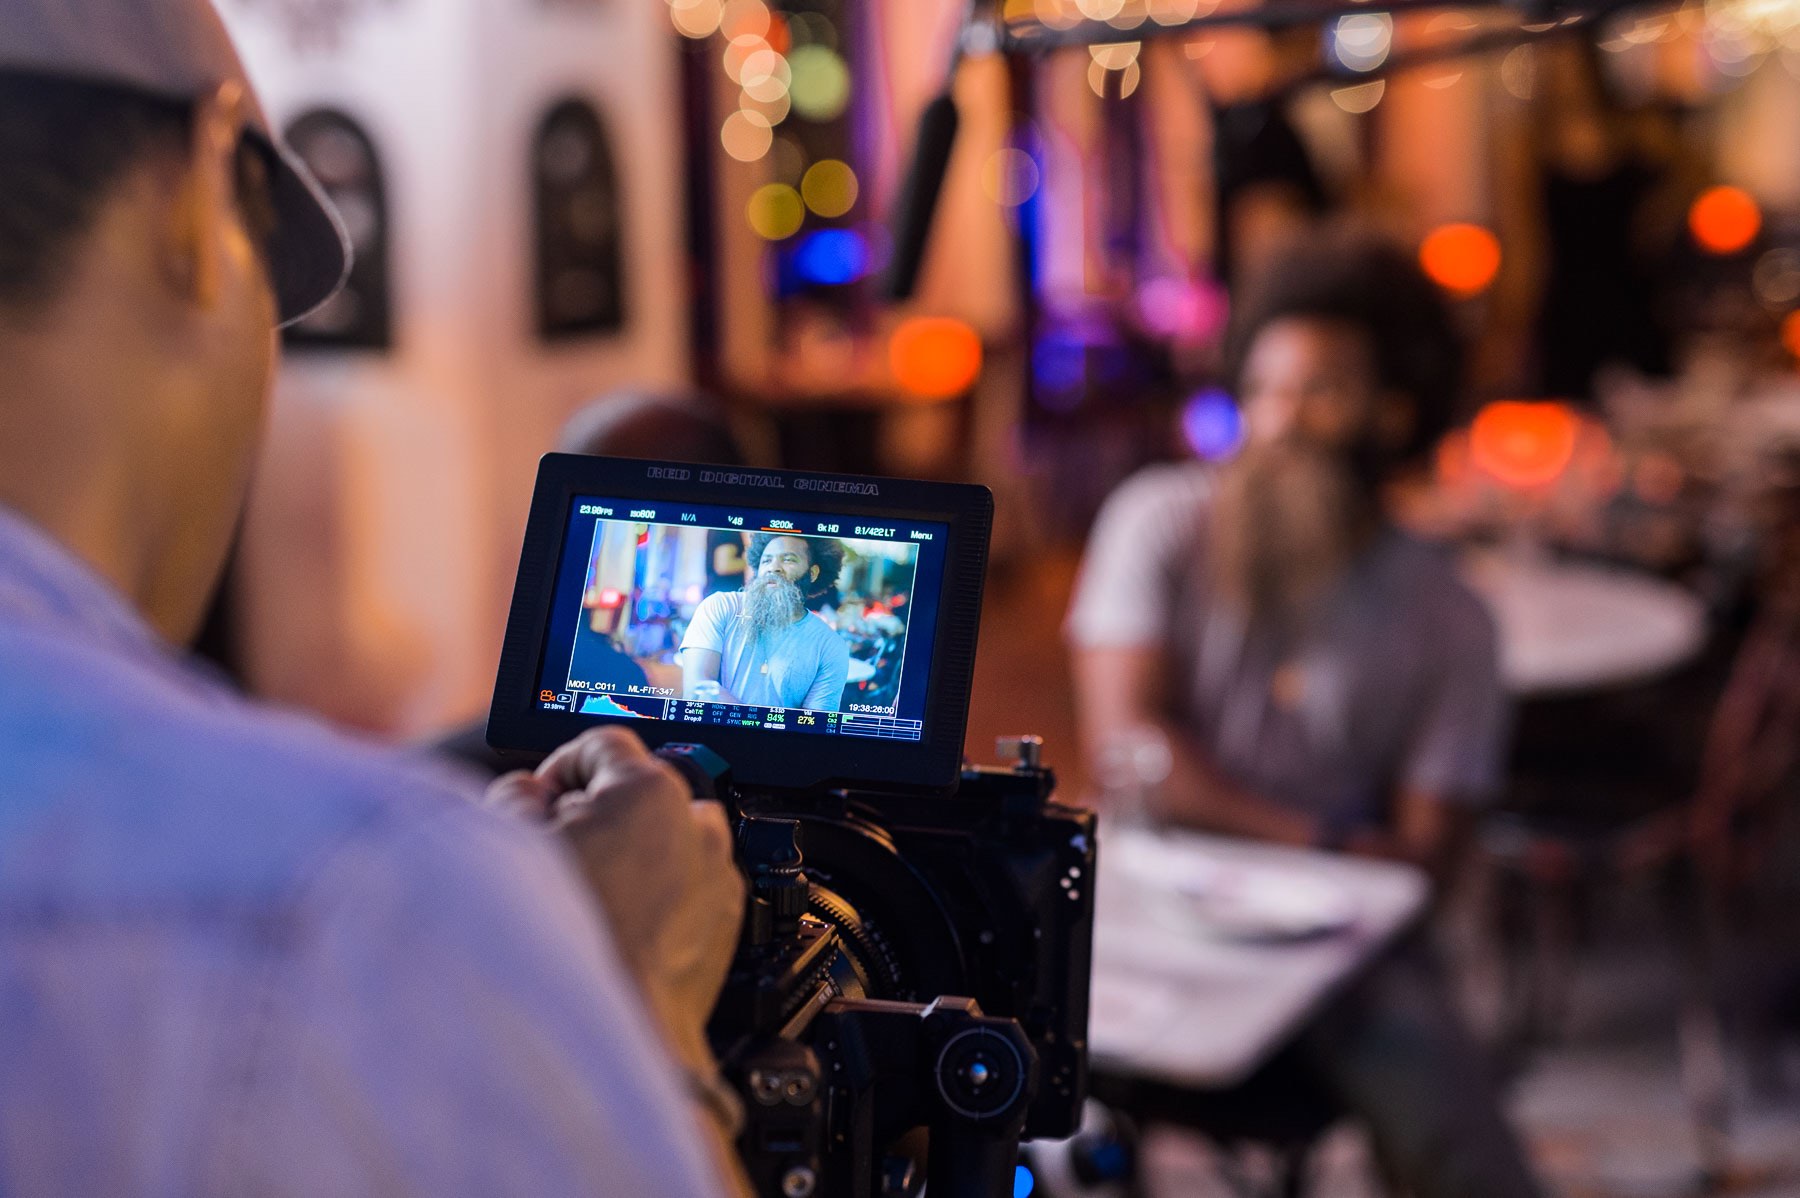 Love and War Feature film mastering and delivery services by C&I Studios View from behind of crew member looking at video display of man with bushy beard sitting at table in a restaurant